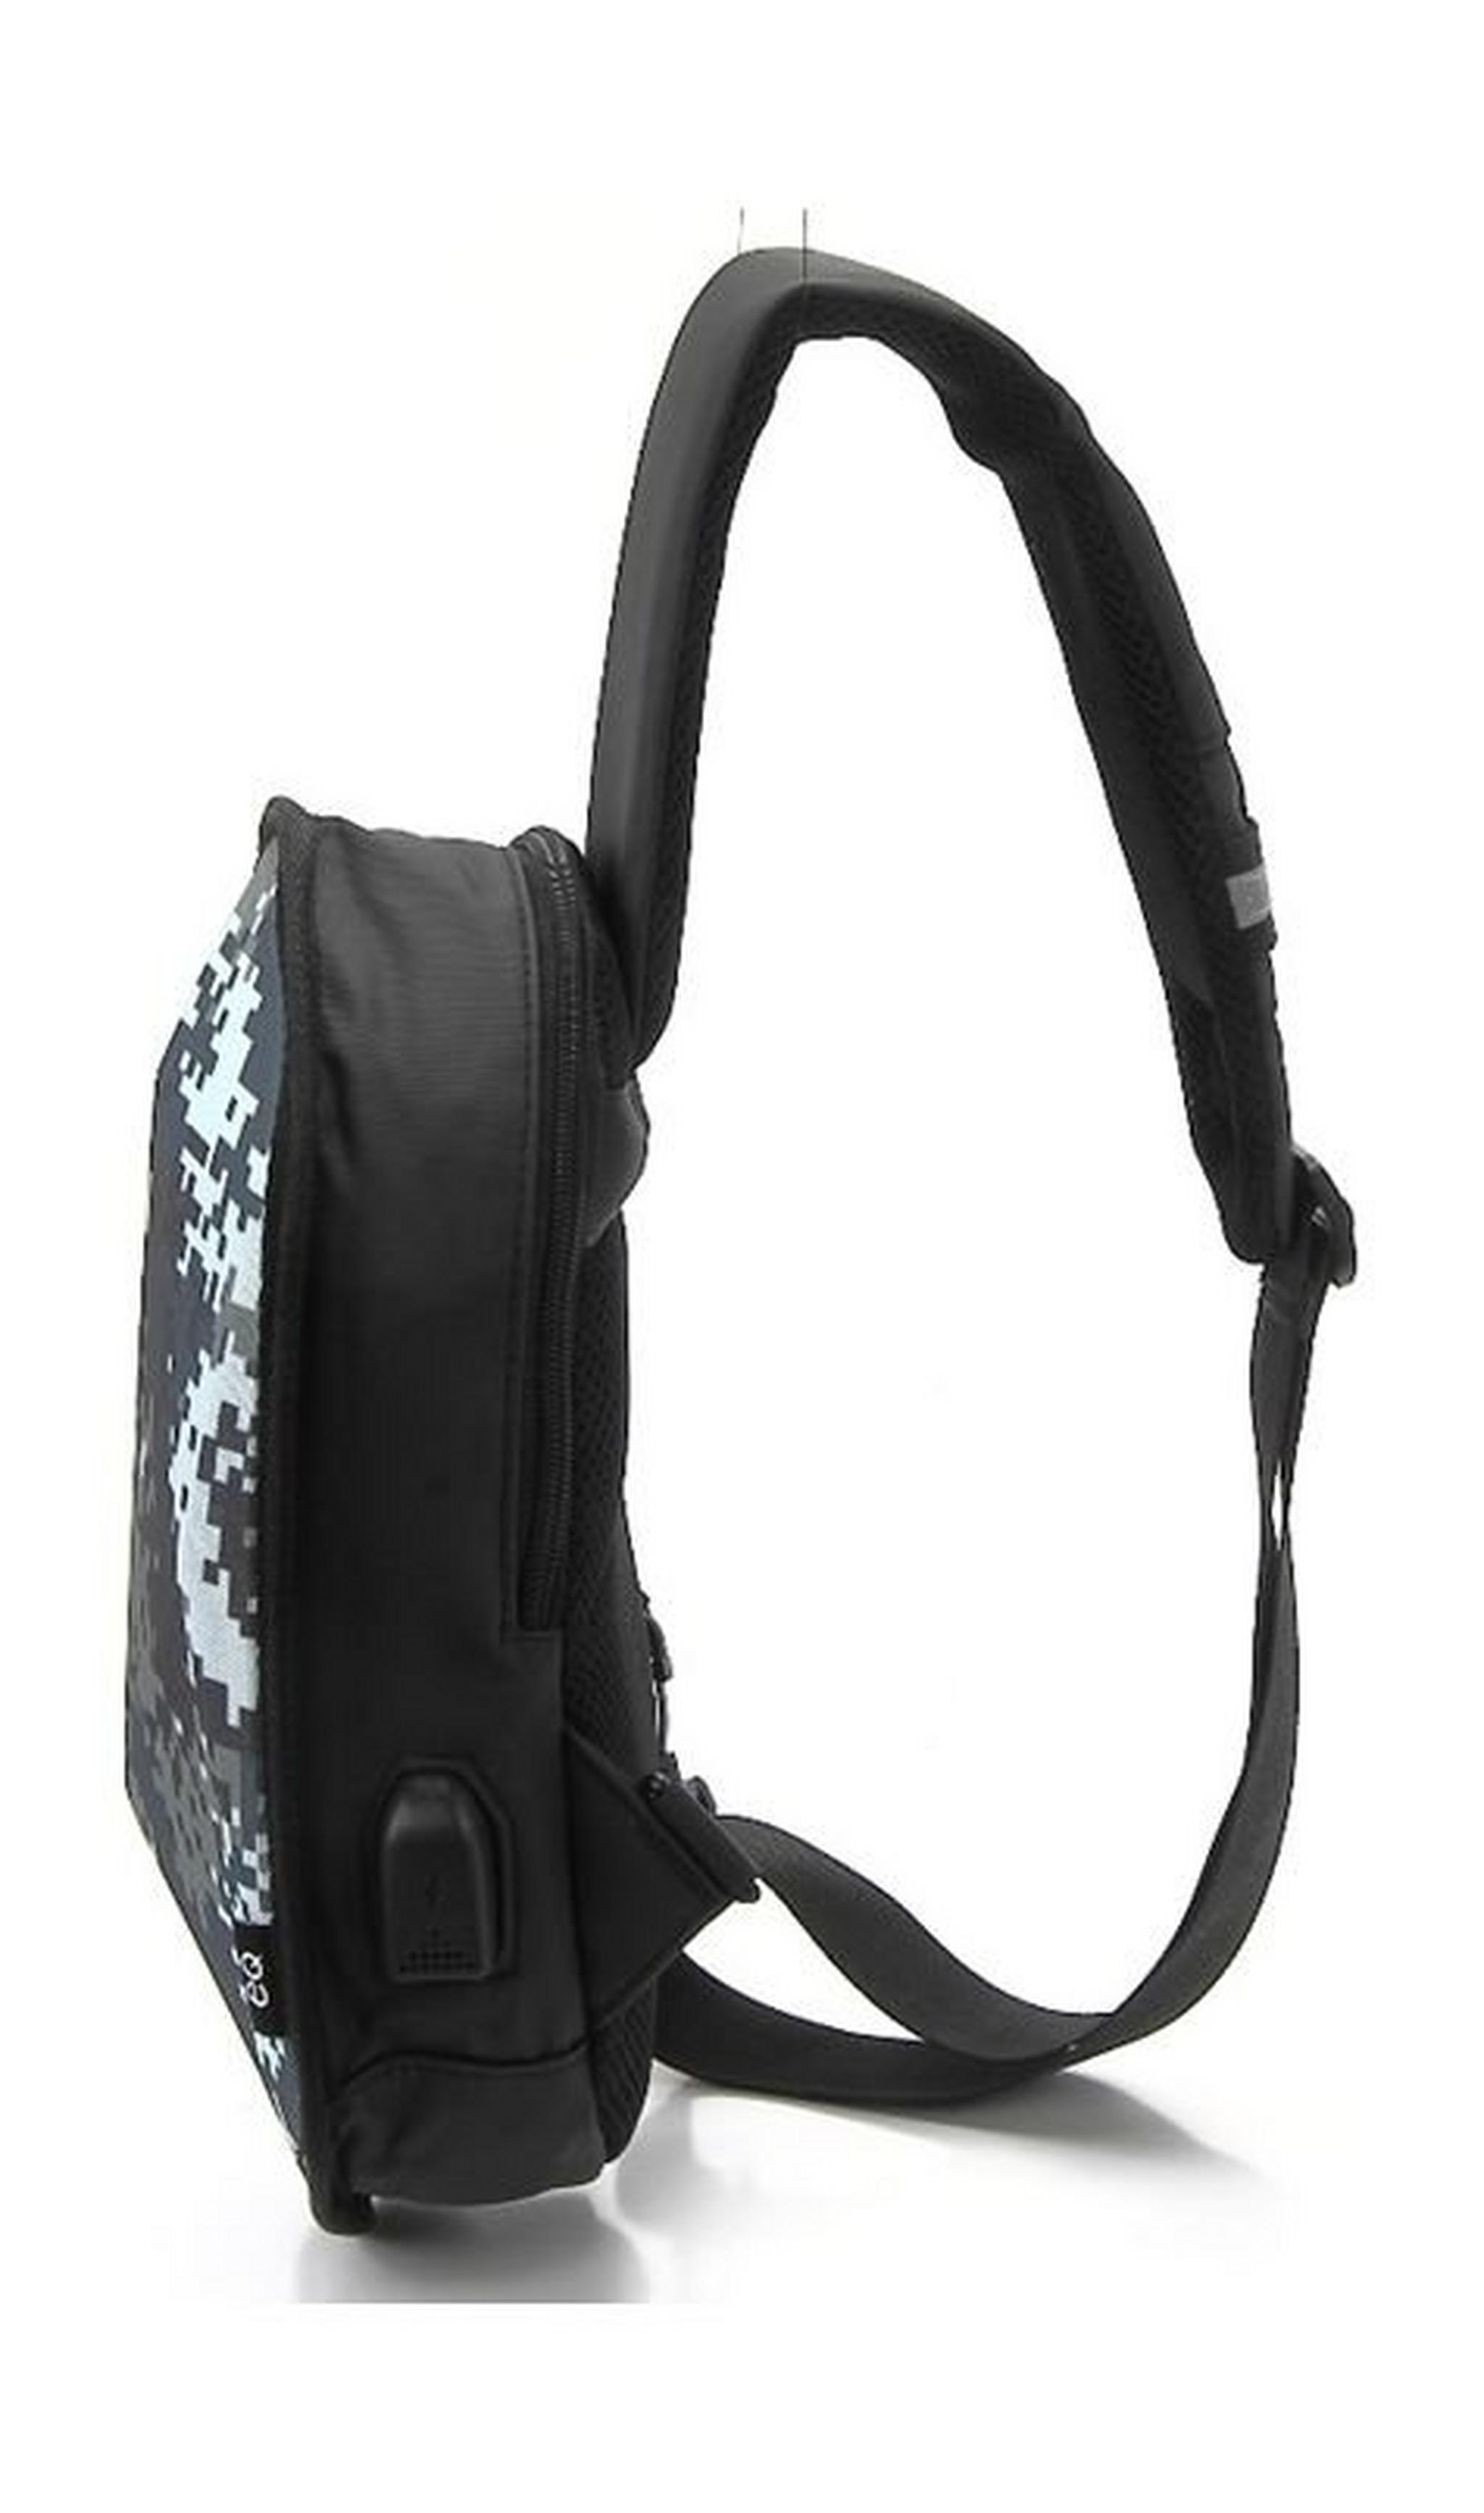 EQ Single Strap Backpack for up to 10-inch Tablet